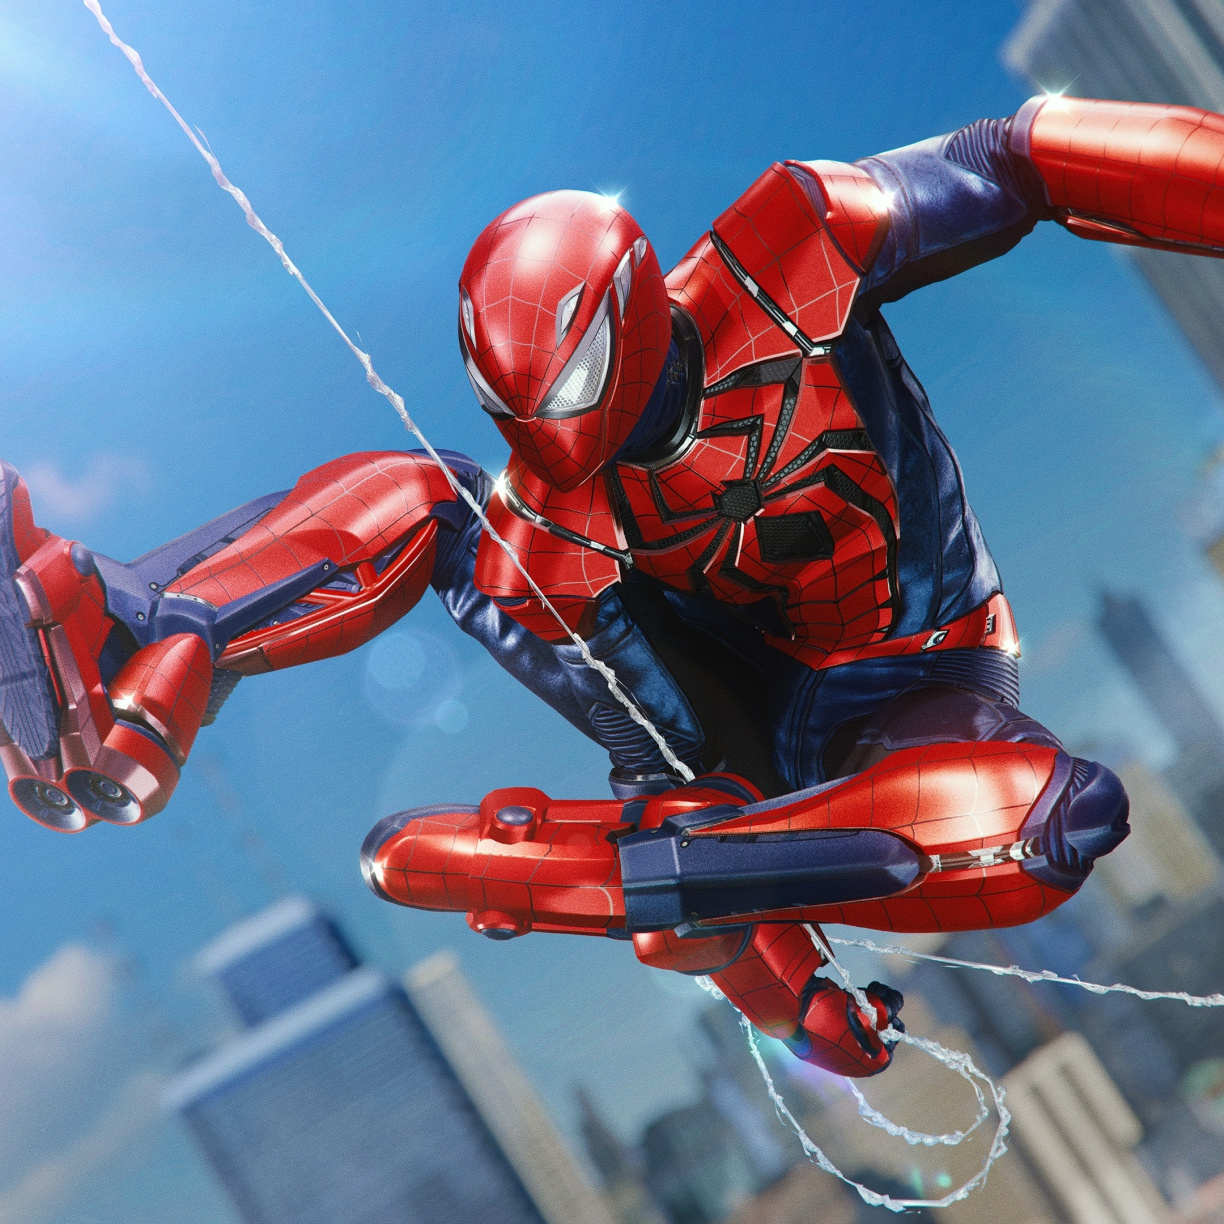 Spider-man, Ps4, Aaron Aikman Armor, Swing, Video Game, - HD Wallpaper 